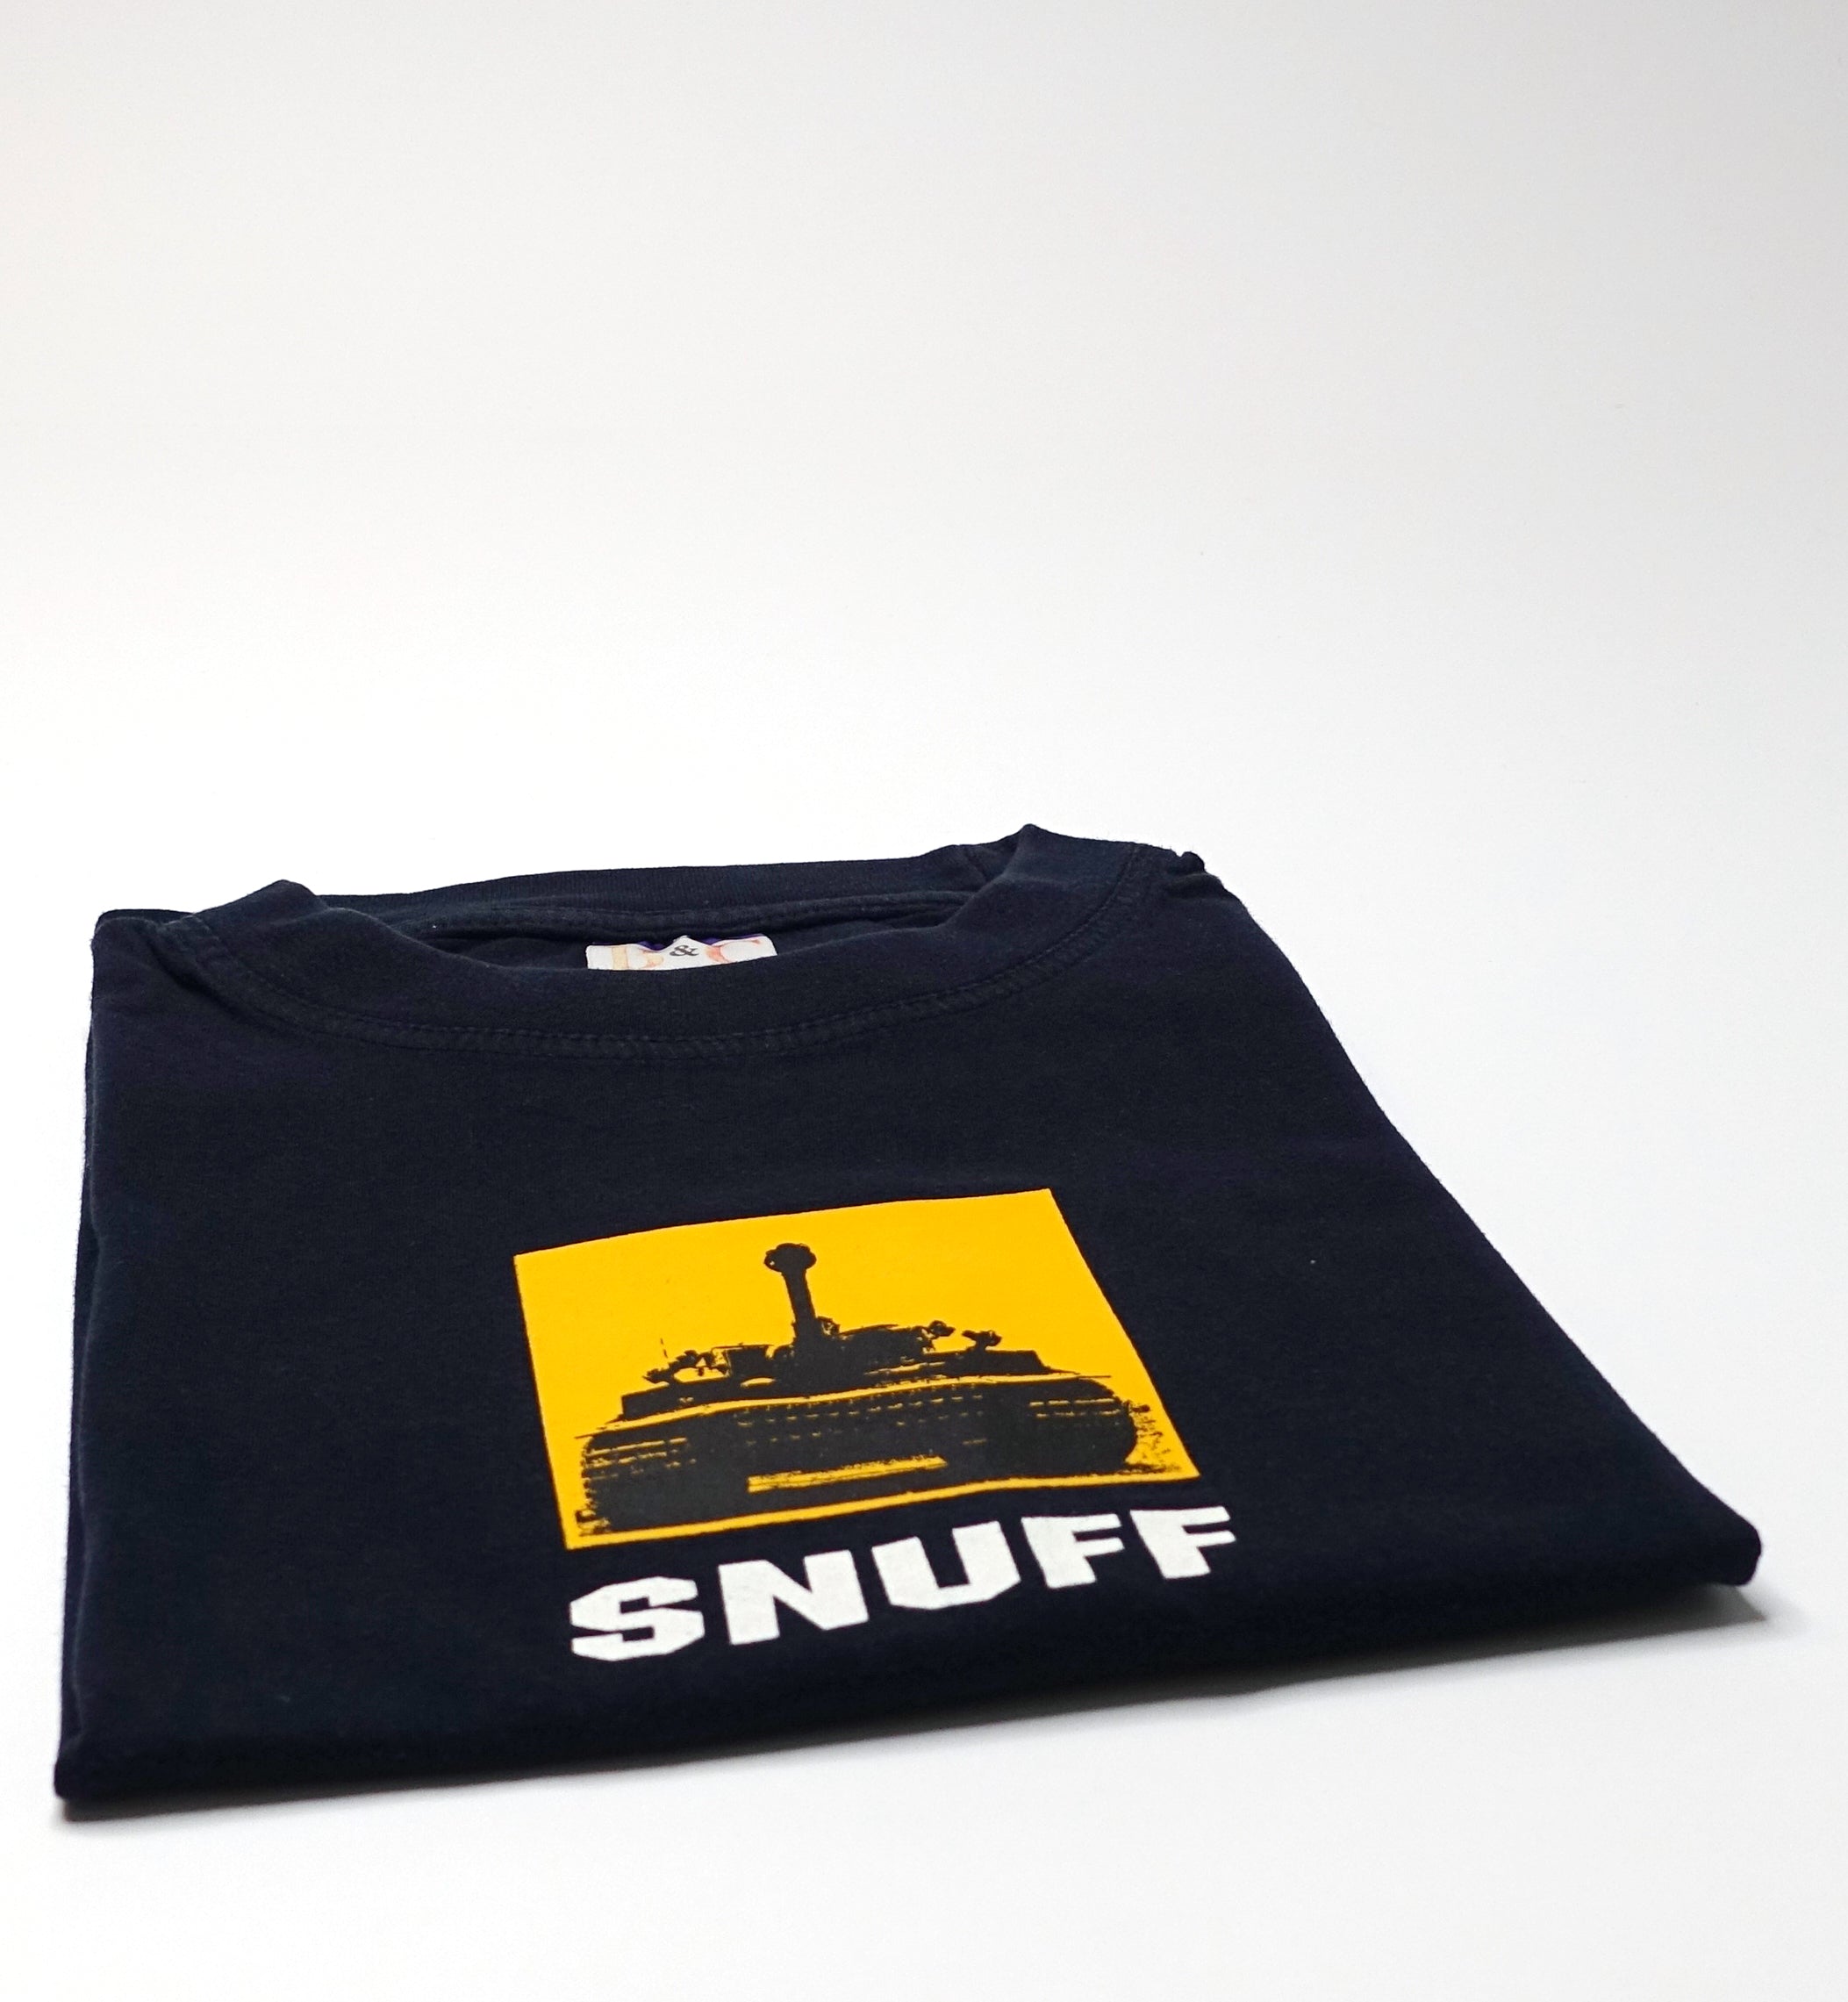 Snuff - Numb Nuts 2000 Tour Shirt Size Large